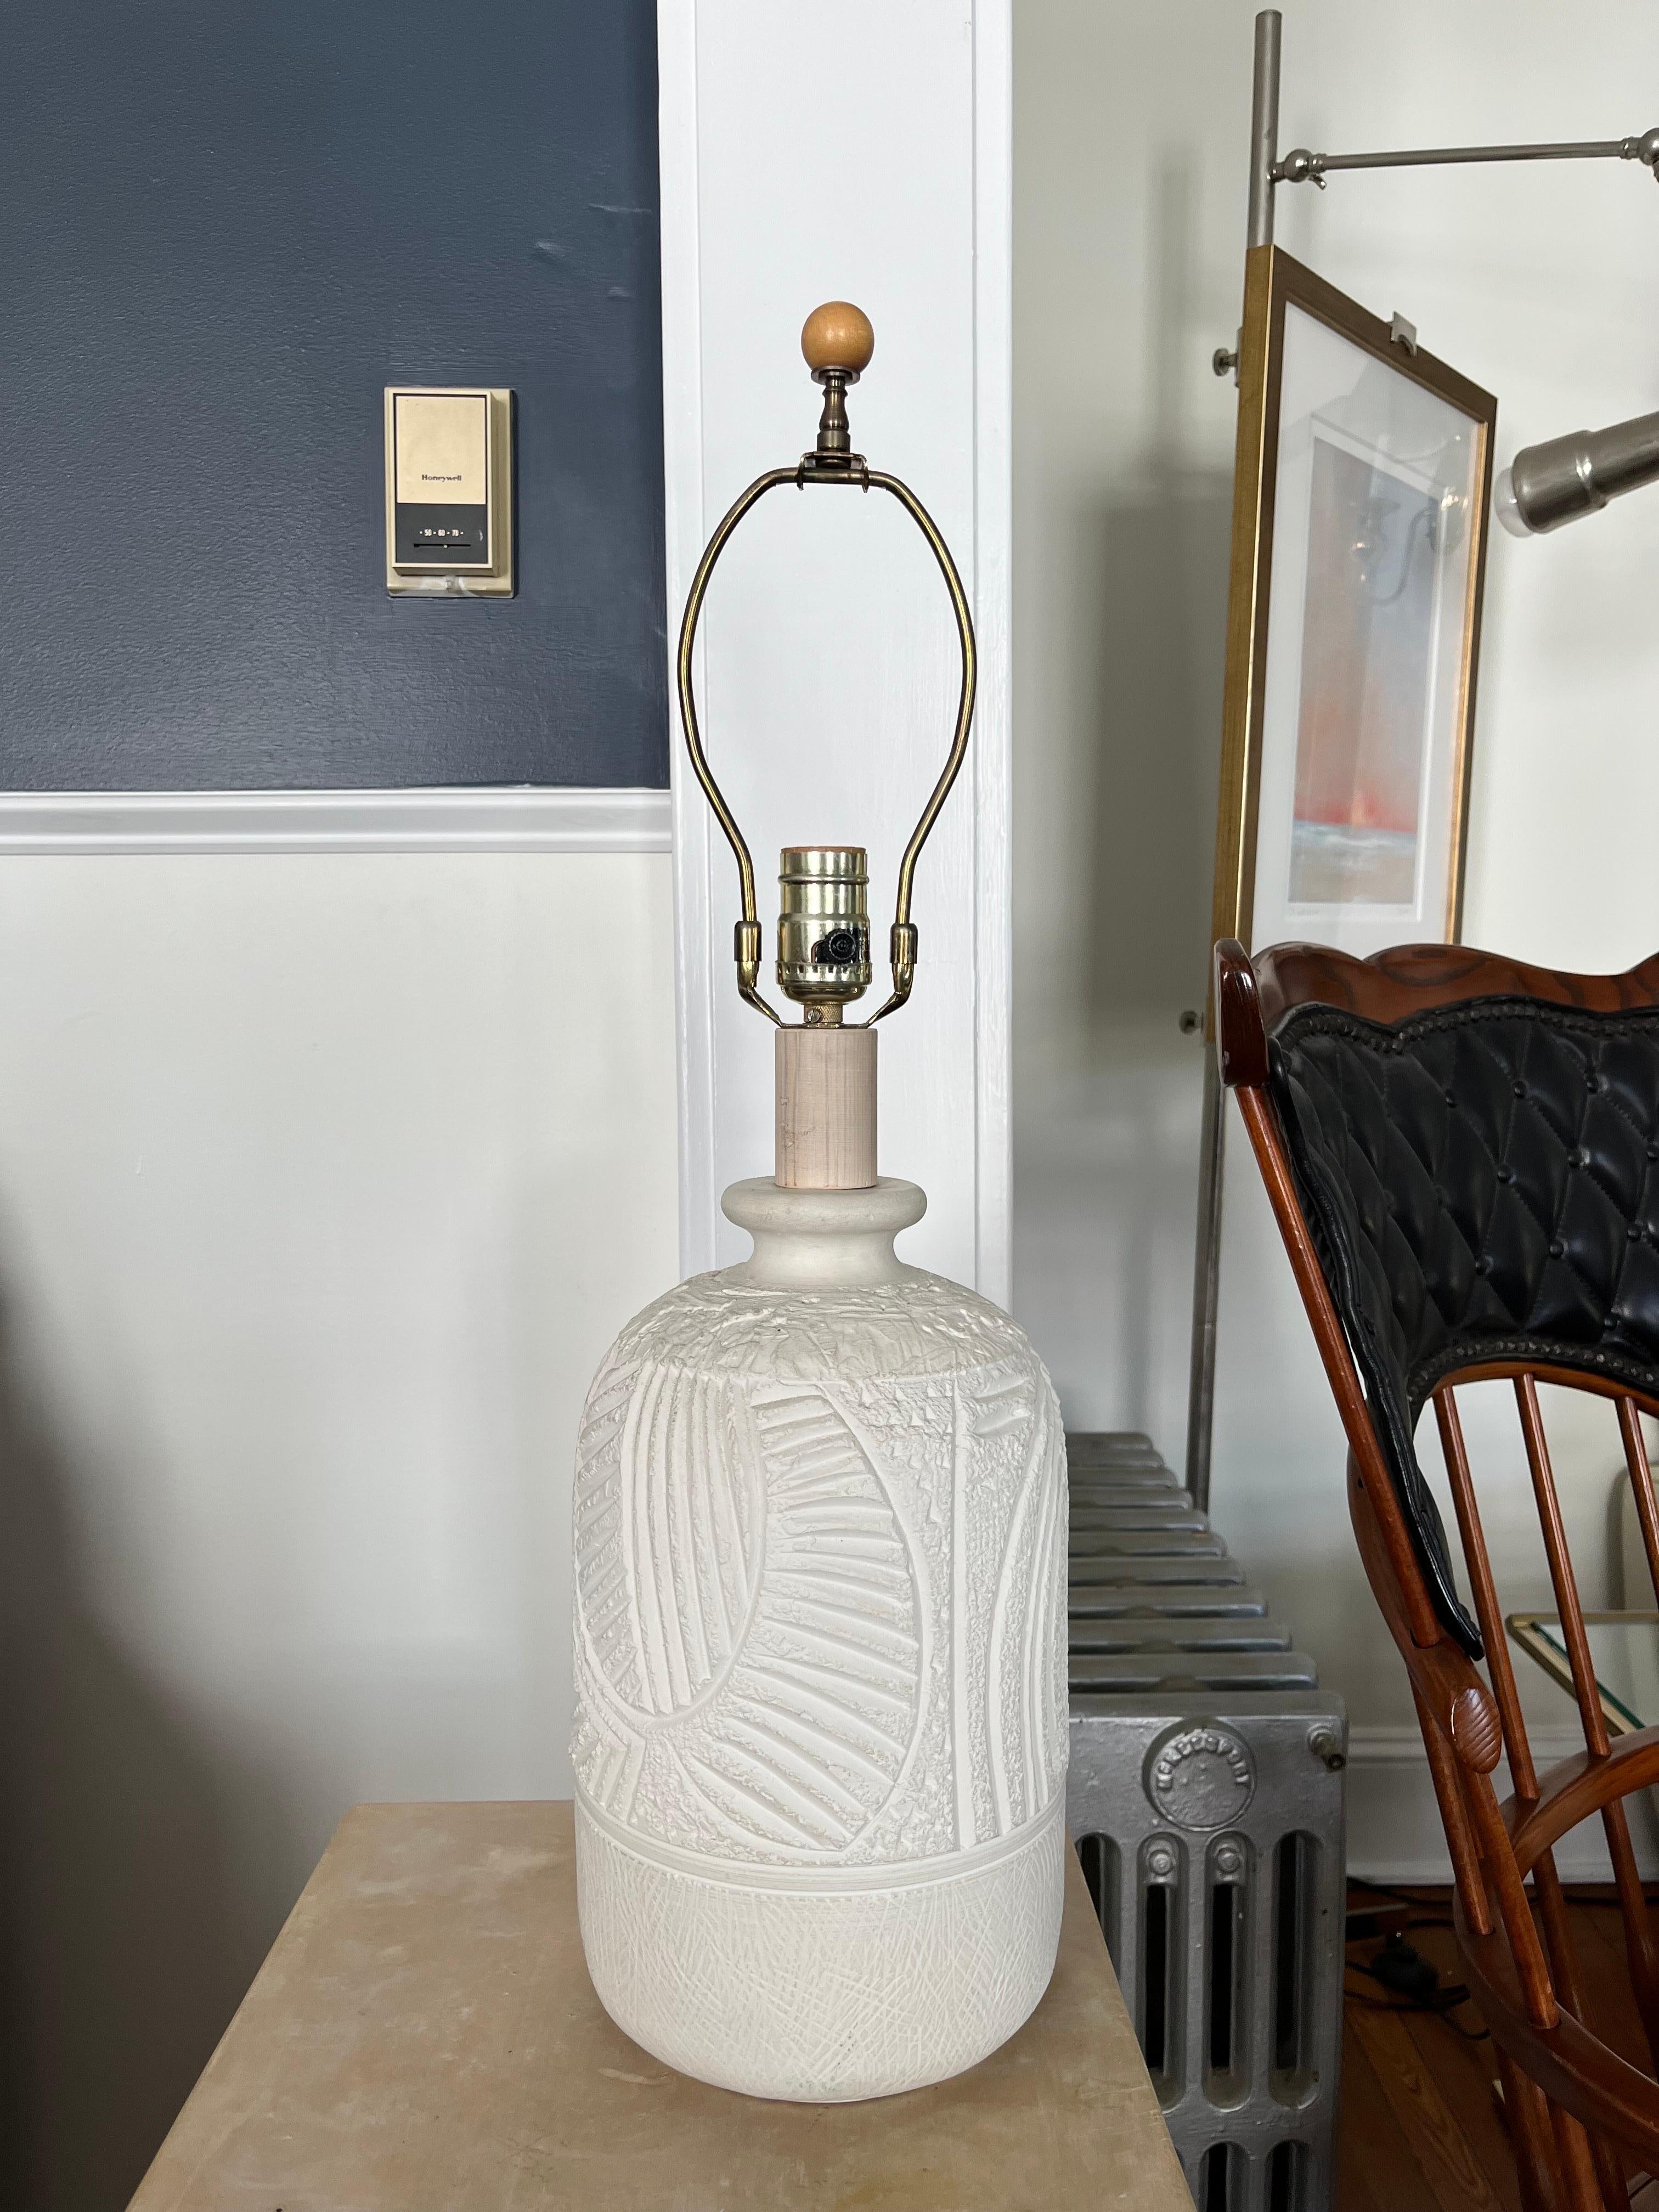 Nicely detailed ceramic lamp by Casual Lamps of California. Deeply carved with geometric design. Unique in its Size and shape.